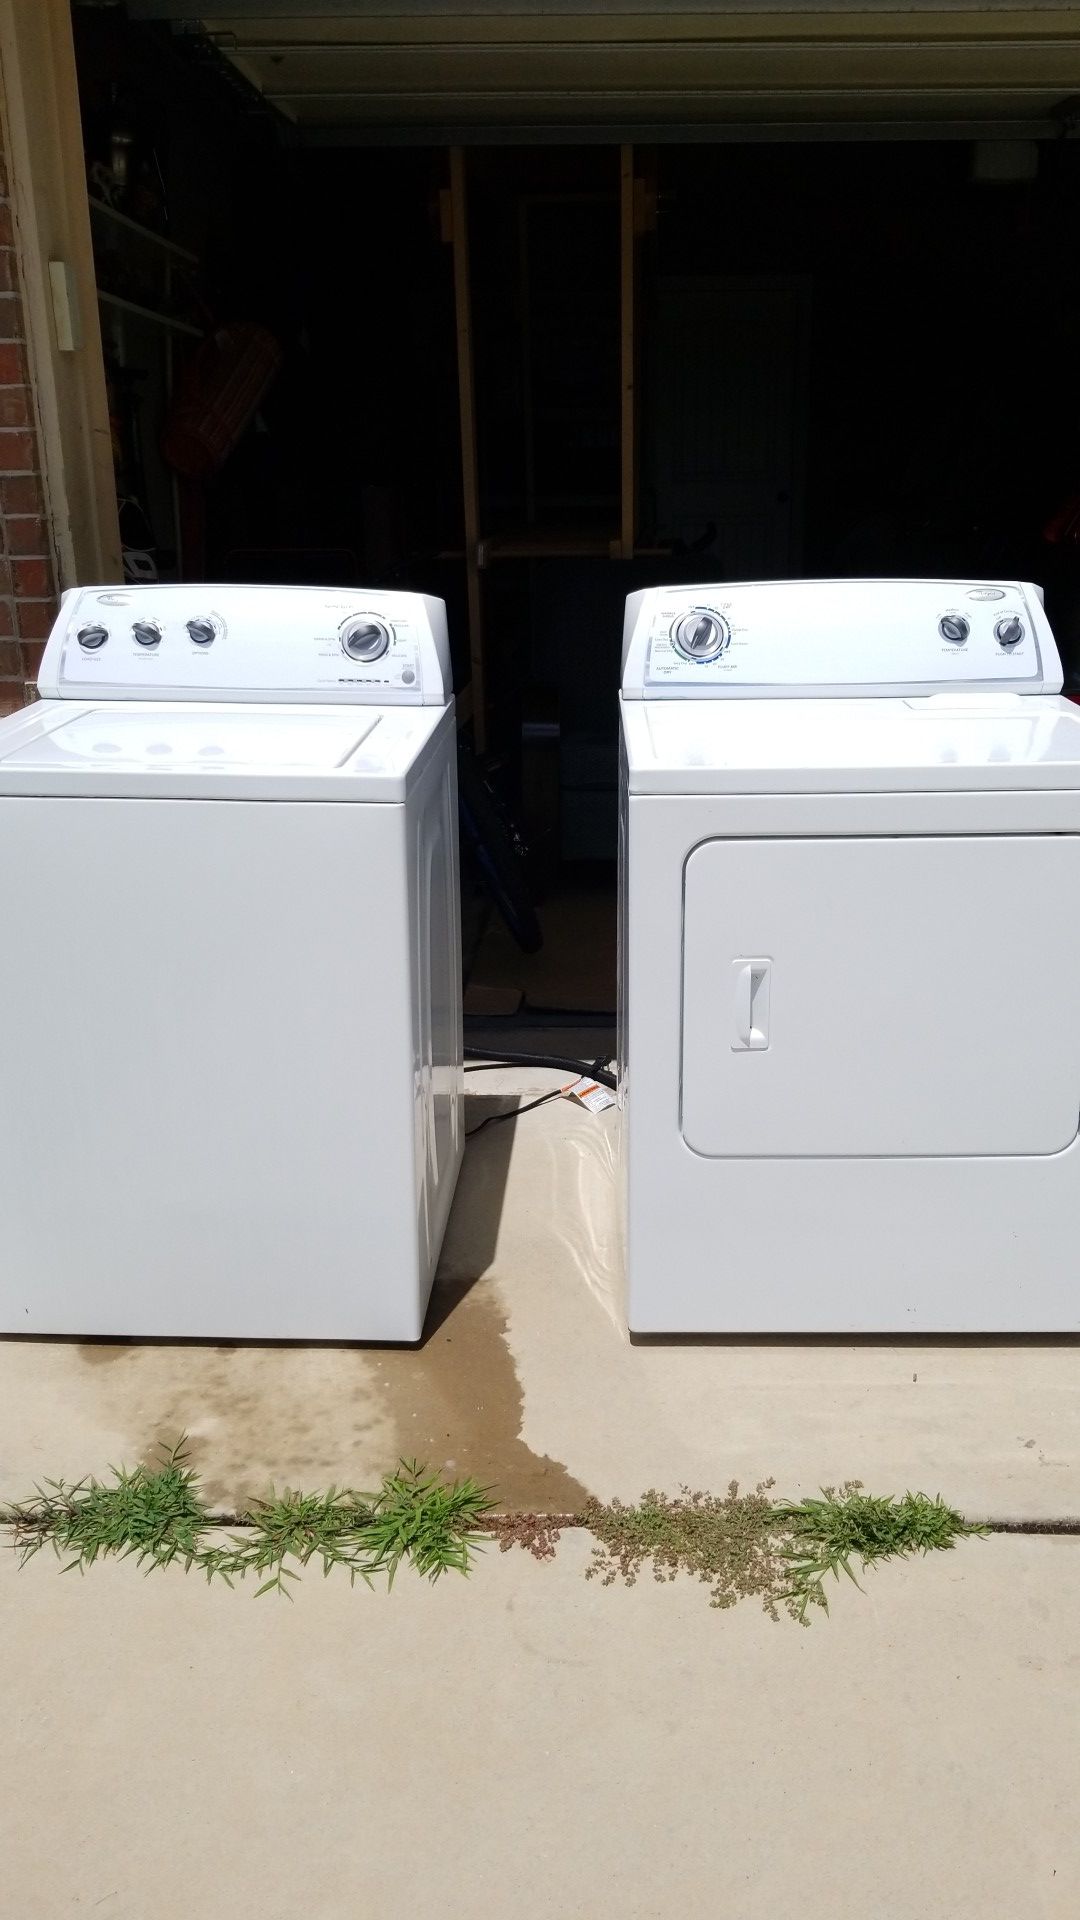 Whirlpool Washer and Dryer AS IS washer keeps water, need cleaning and repair